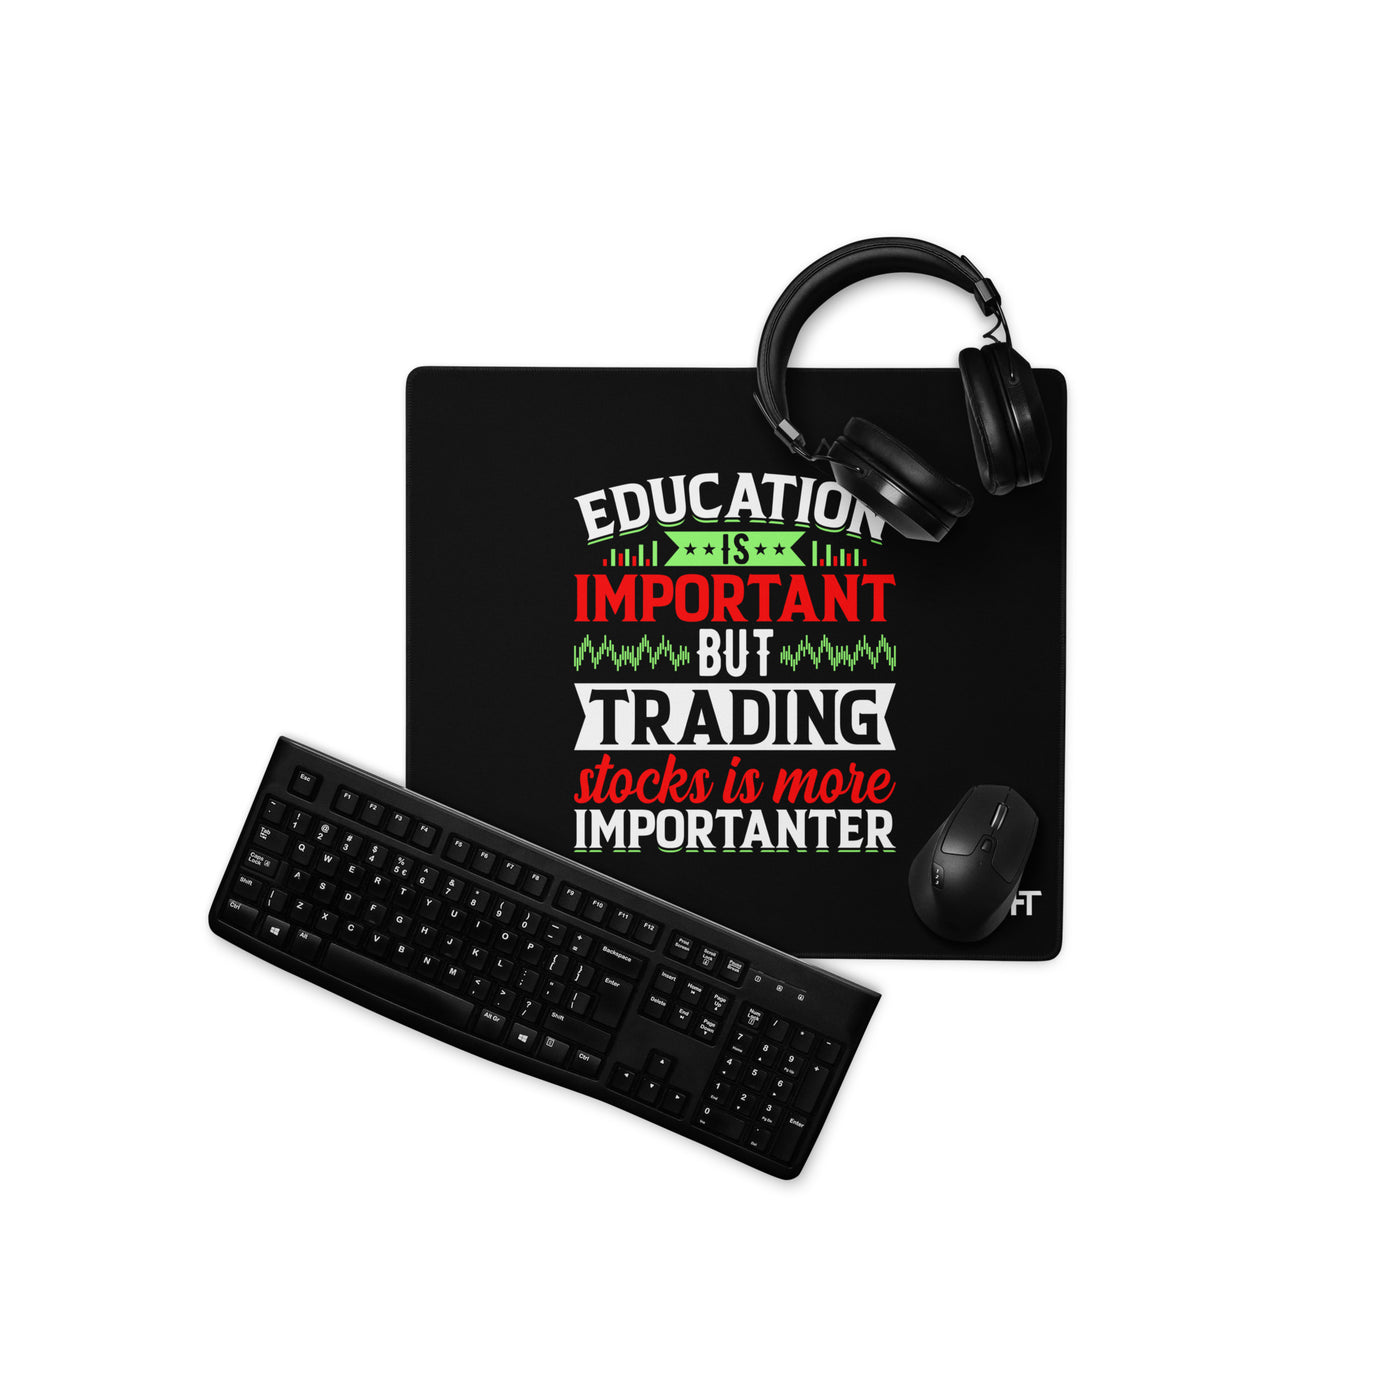 Education is important but trading stocks is more importanter - Desk Mat